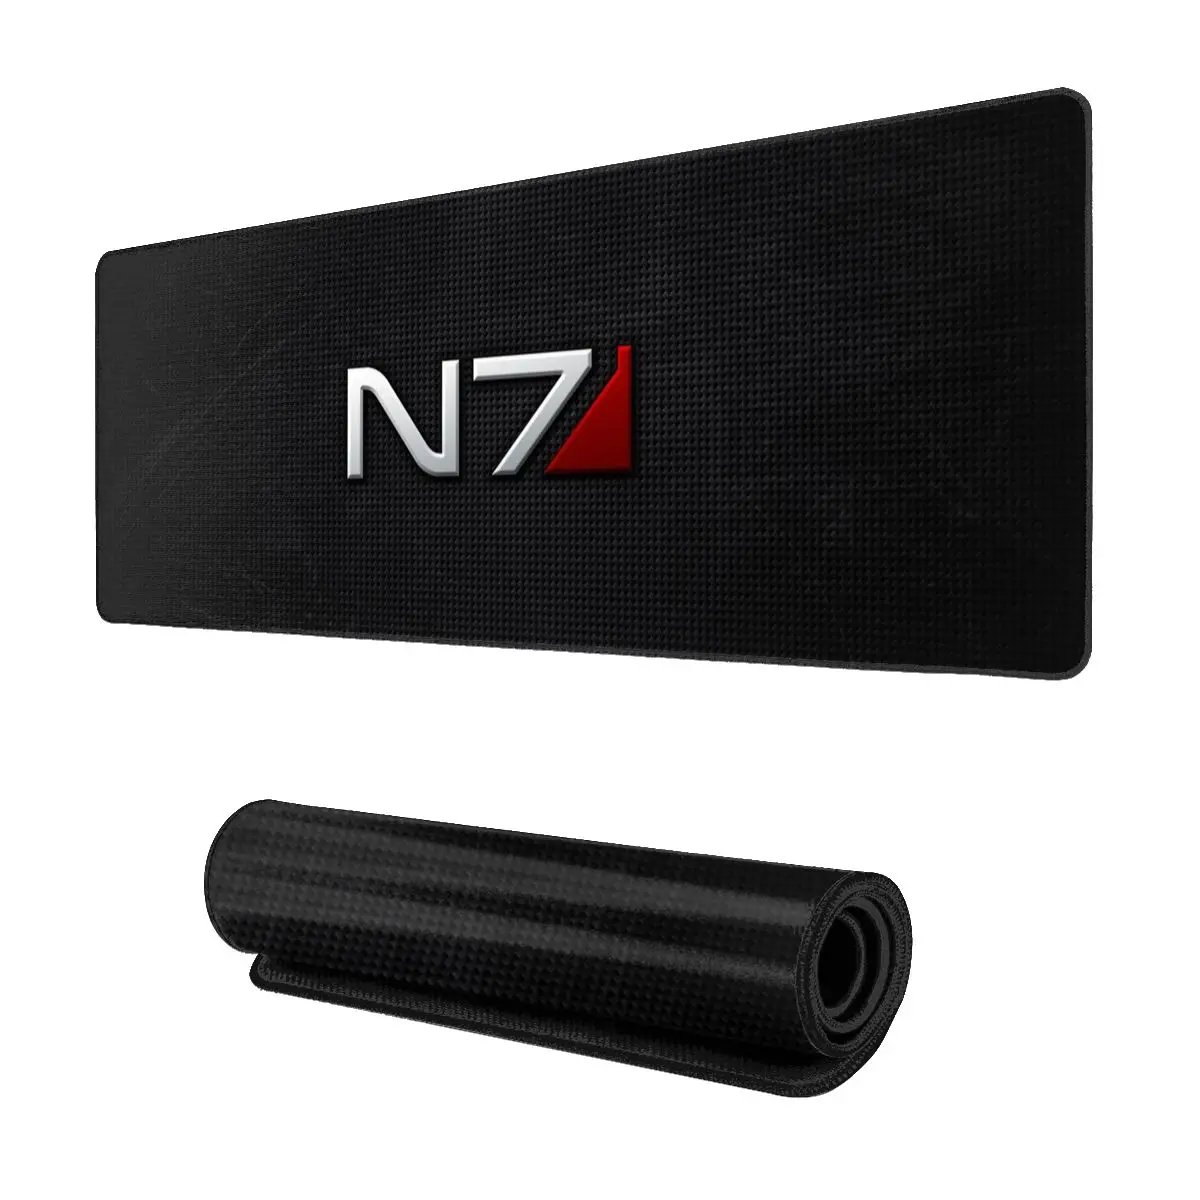 

Large N7 Mass Effect Logo Mouse Pad Rubber Gaming Mousepad Accessories Alliance Military Emblem Video Game Office PC Desk Mat